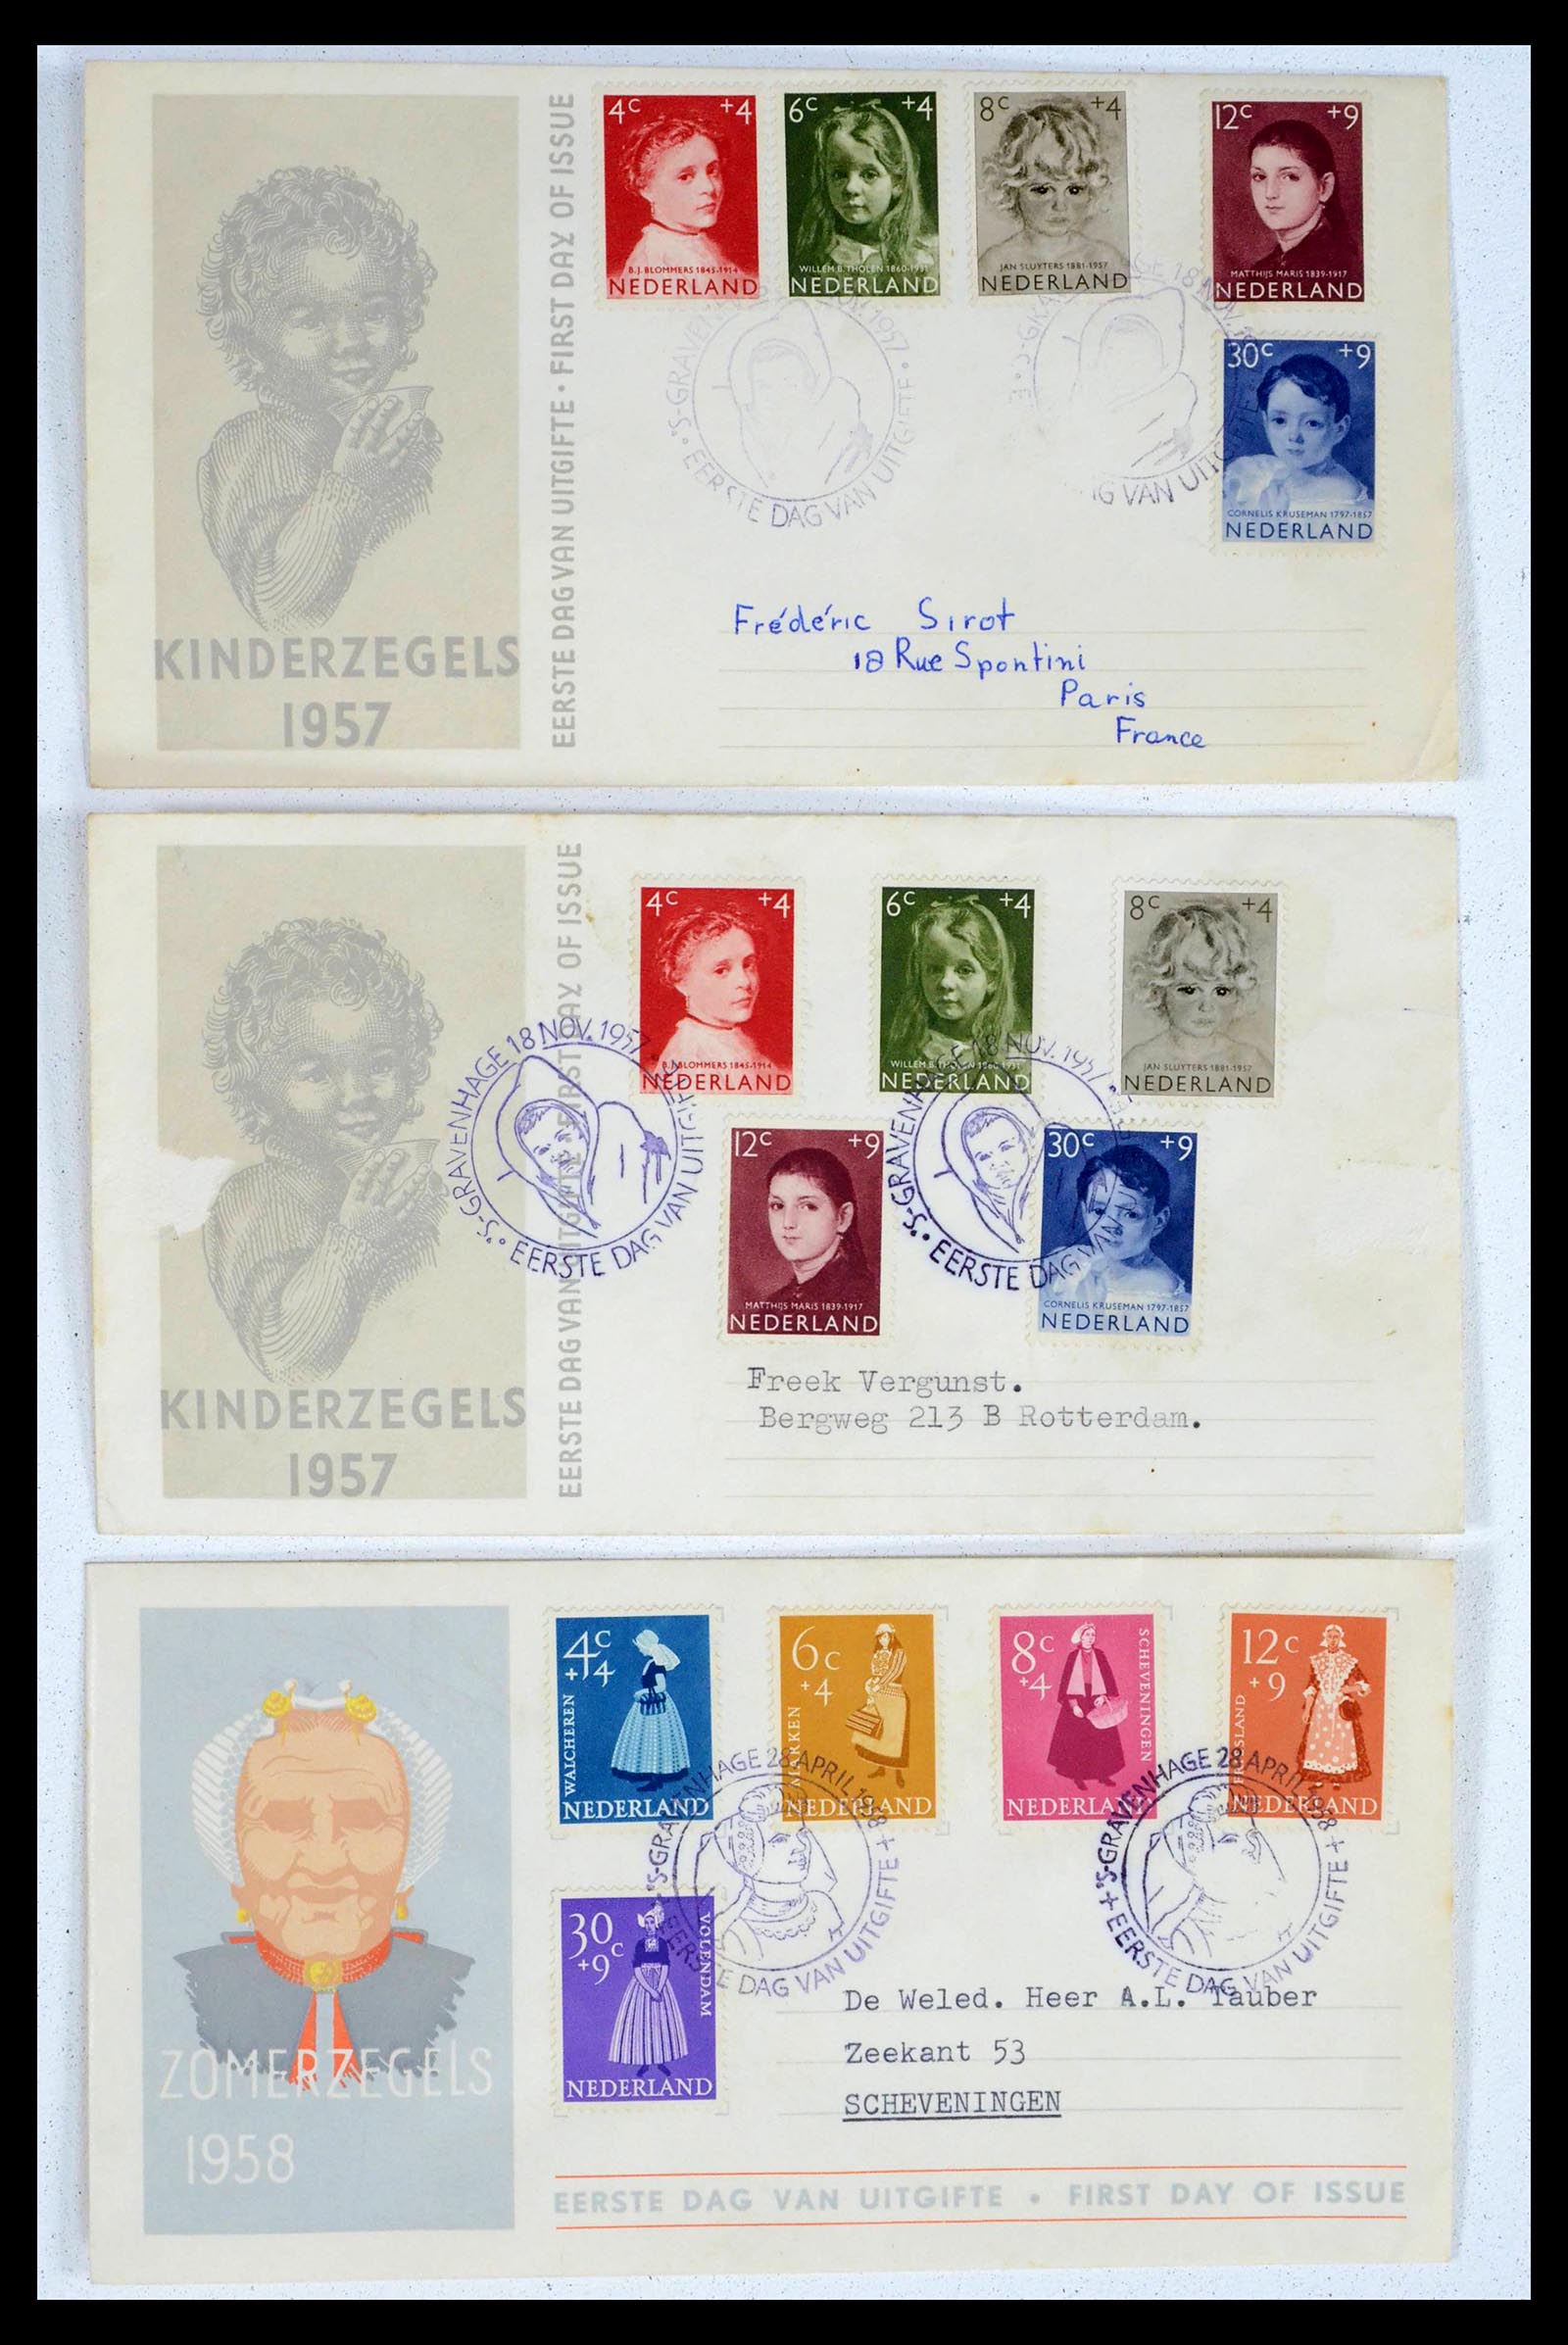 39474 0019 - Stamp collection 39474 Netherlands FDC's 1950-1960.